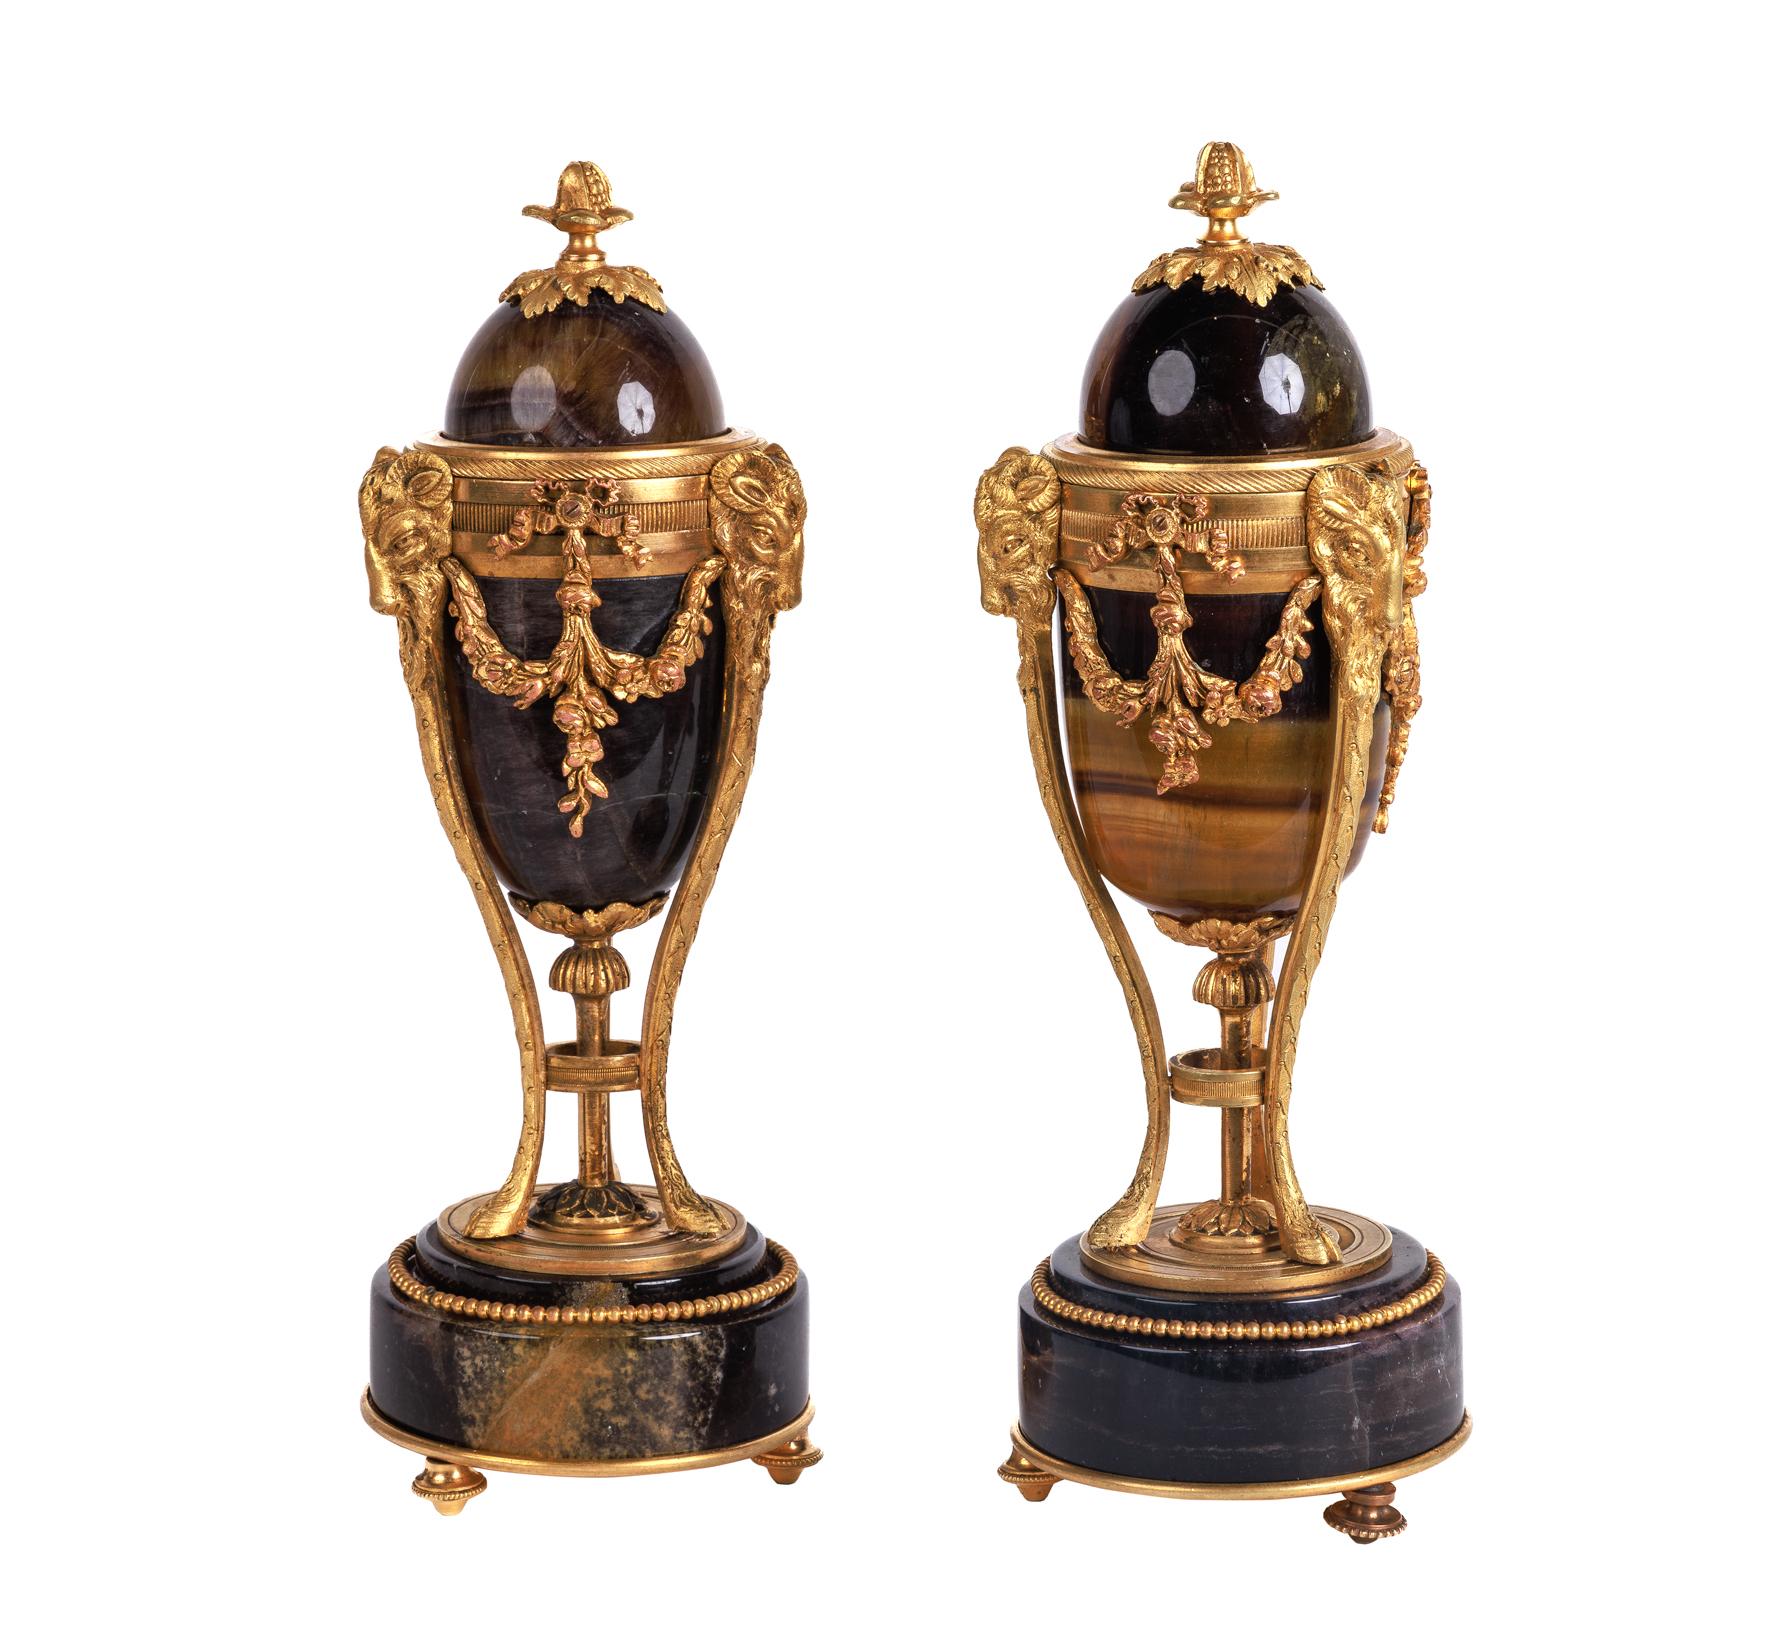 A Rare Pair of French Ormolu-Mounted Blue John Vases / Candlesticks, C. 1870, In the stye of Matthew Boulton.

These rare and extremely elegant garniture vases and covers can be turned into candlesticks by simply take the tops off and flipping them